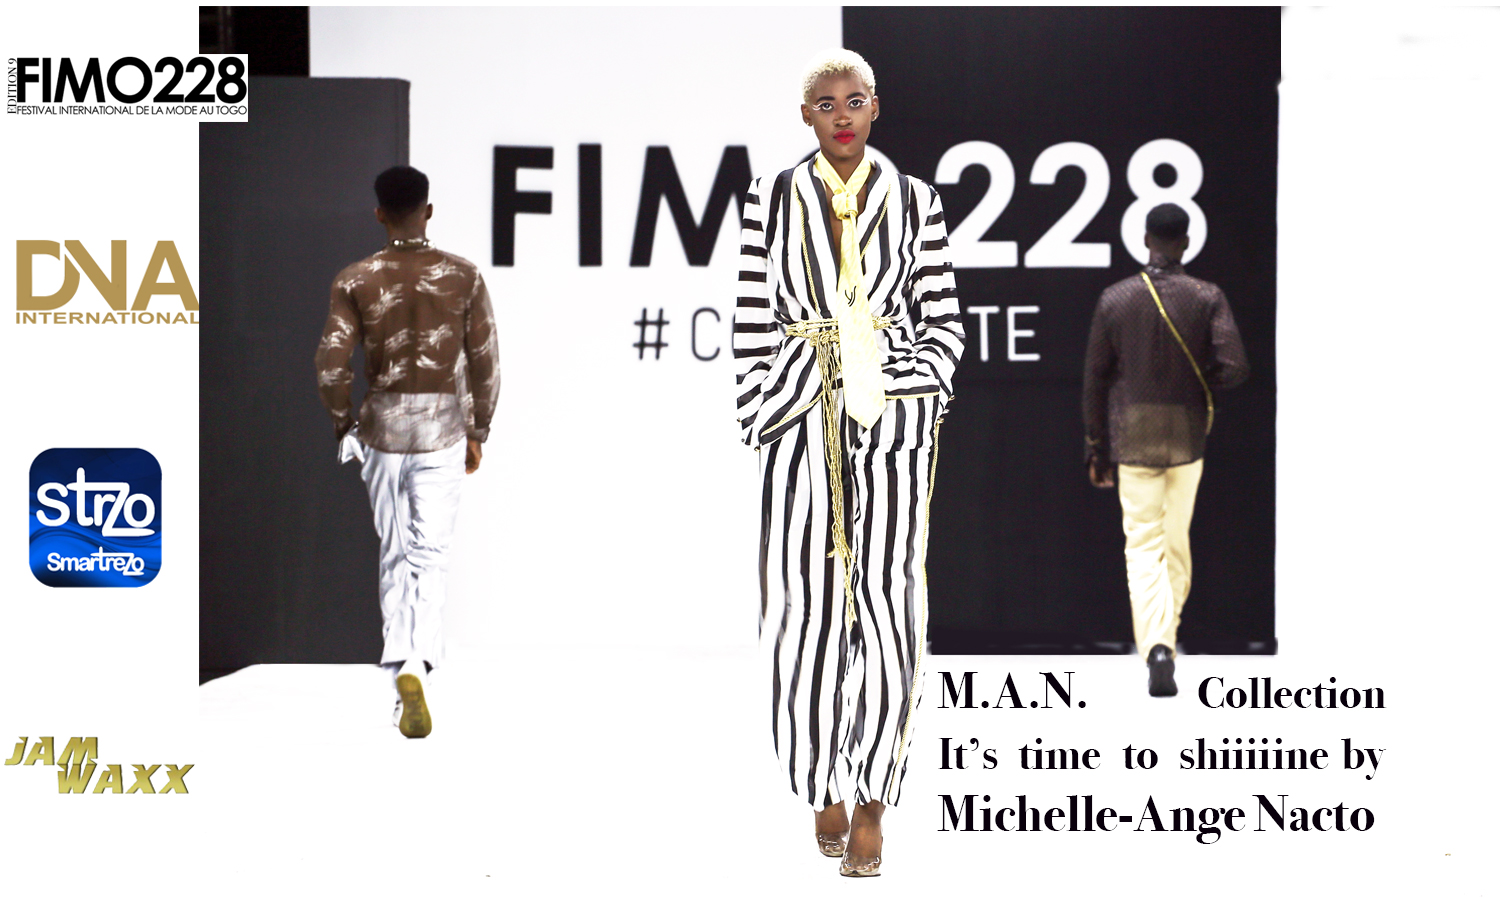 M.A.N. – Collection It’s time to shiiiiine by Michelle-Ange Nacto